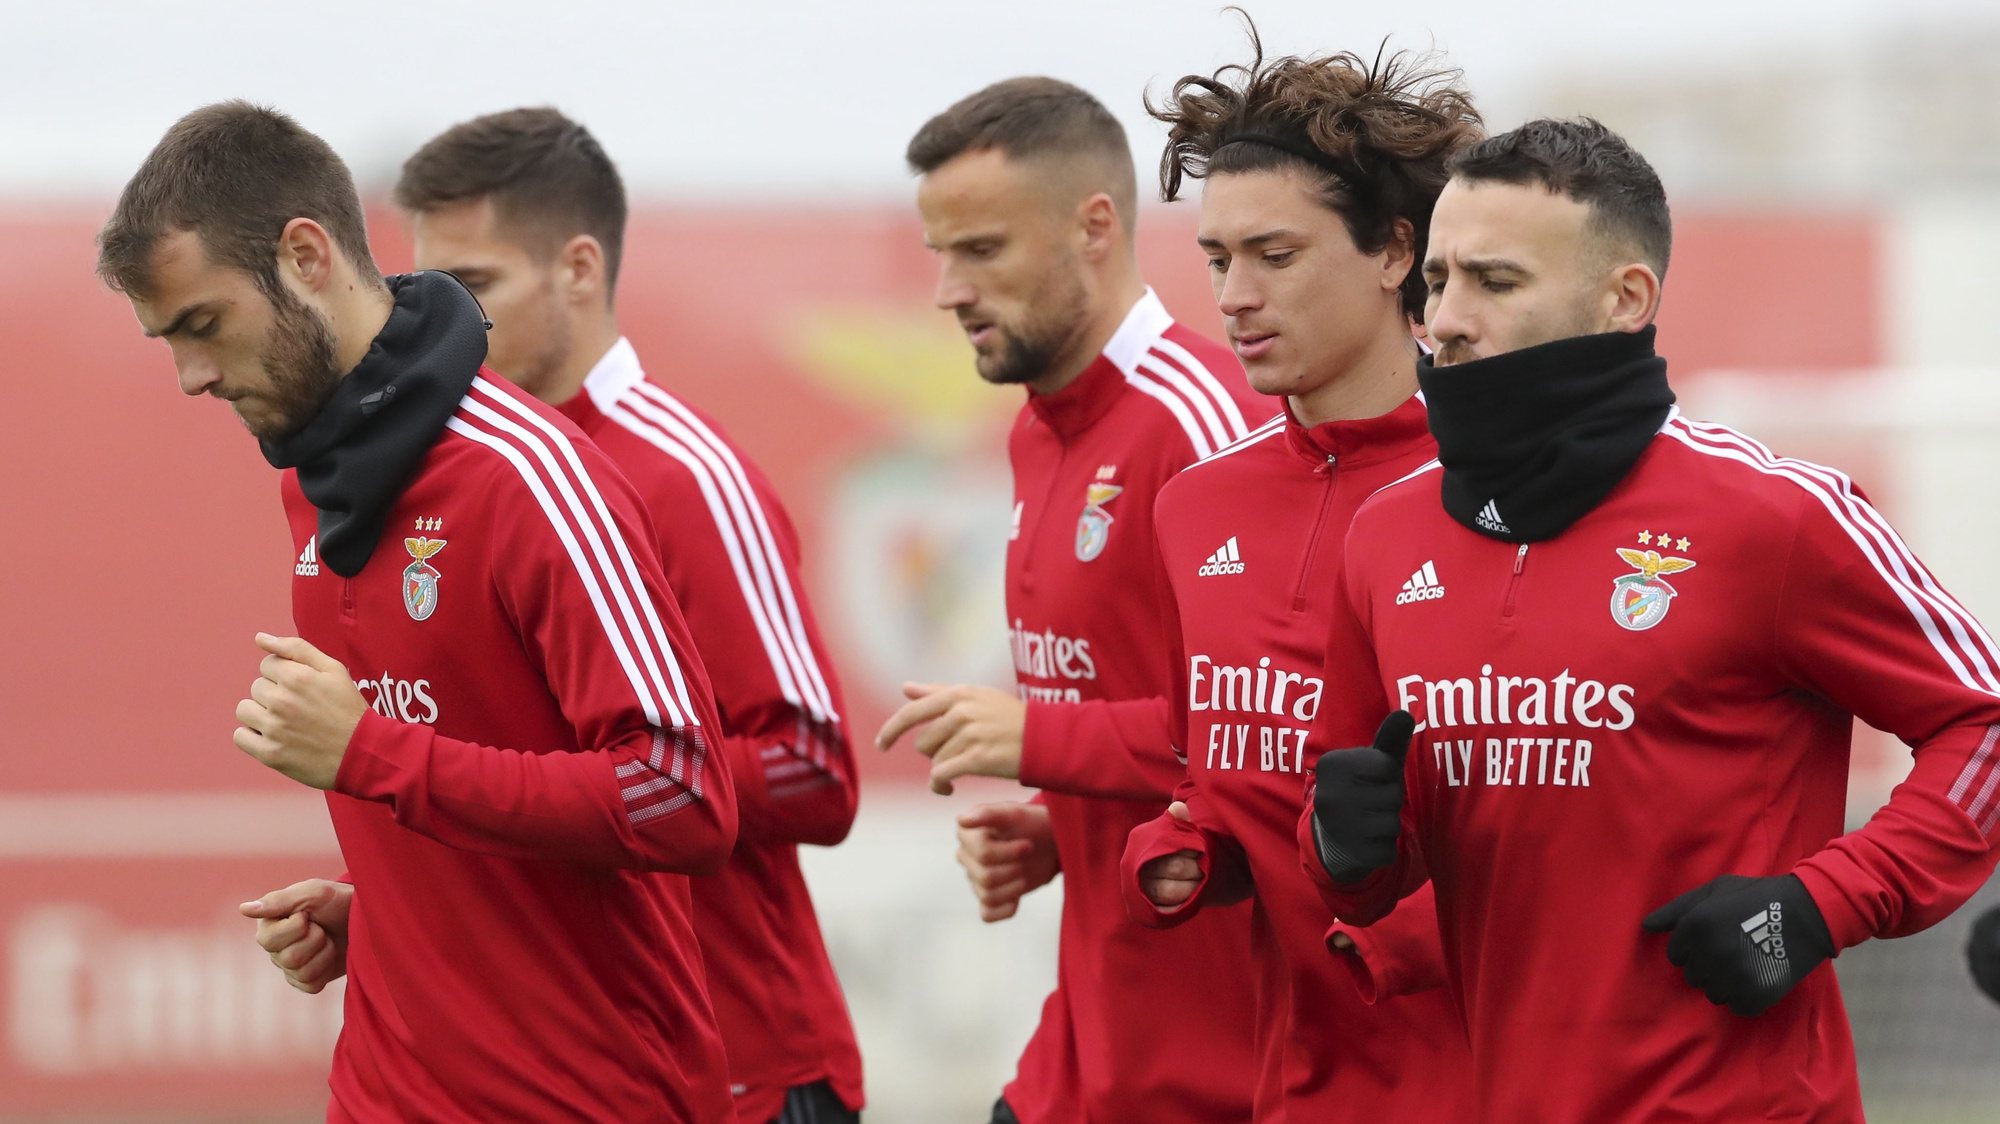 Benfica&#039;s players (L-R), Ferro, Haris Seferovic, Darwin Nunez, and Nicolas Otamendi, warm up during a training session at Benfica Campus in Seixal, outskirts of Lisbon, Portugal, 07 December 2021. Benfica will face Dynamo Kyiv in their UEFA Champions League group E soccer match on 08 December 2021. MANUEL DE ALMEIDA/LUSA